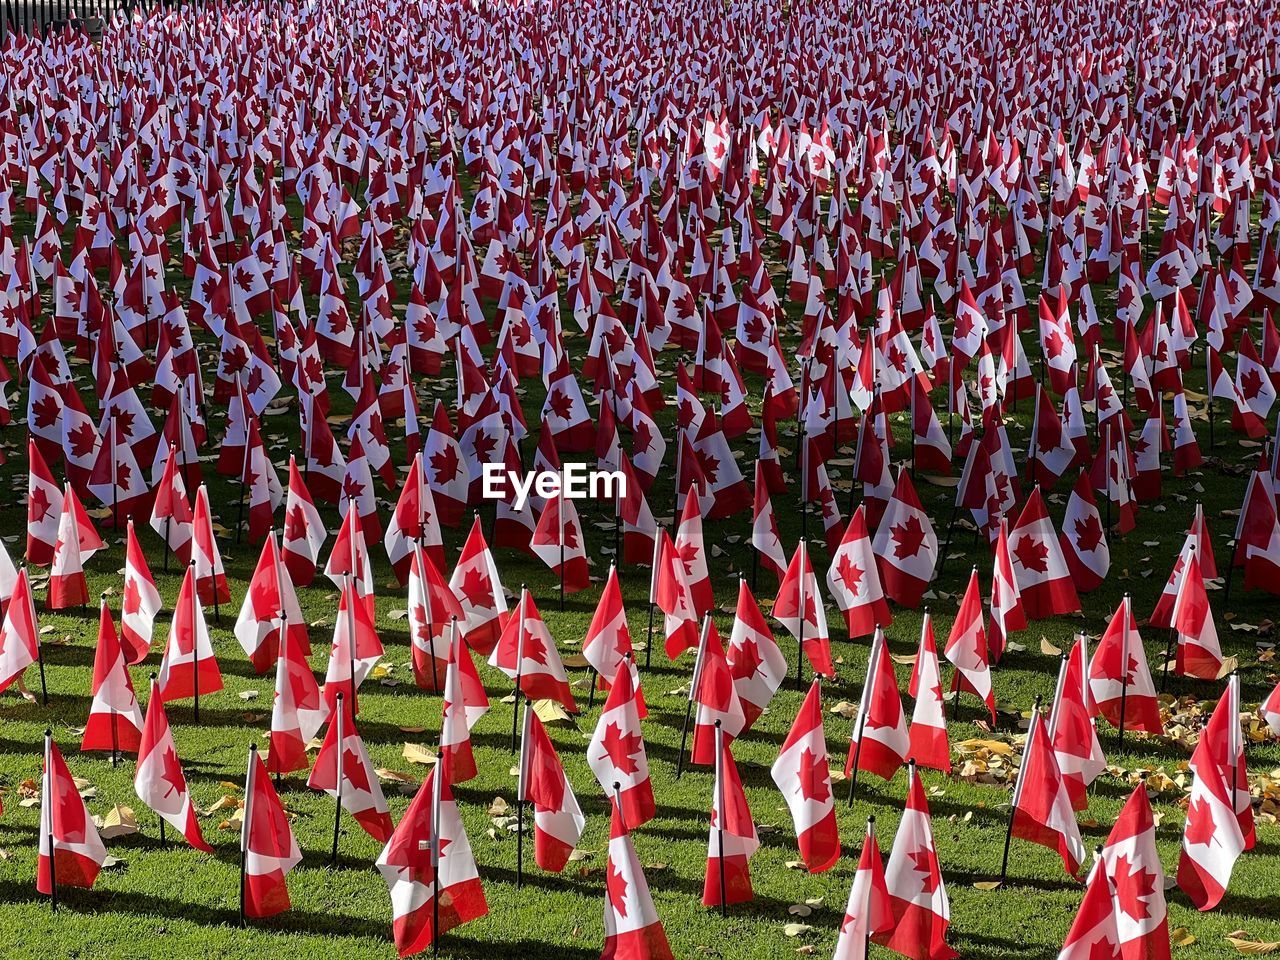 marching, red, group of people, crowd, musician, in a row, grass, event, day, celebration, stadium, cheering, sports, large group of people, outdoors, high angle view, nature, plant, clothing, tradition, abundance, large group of objects